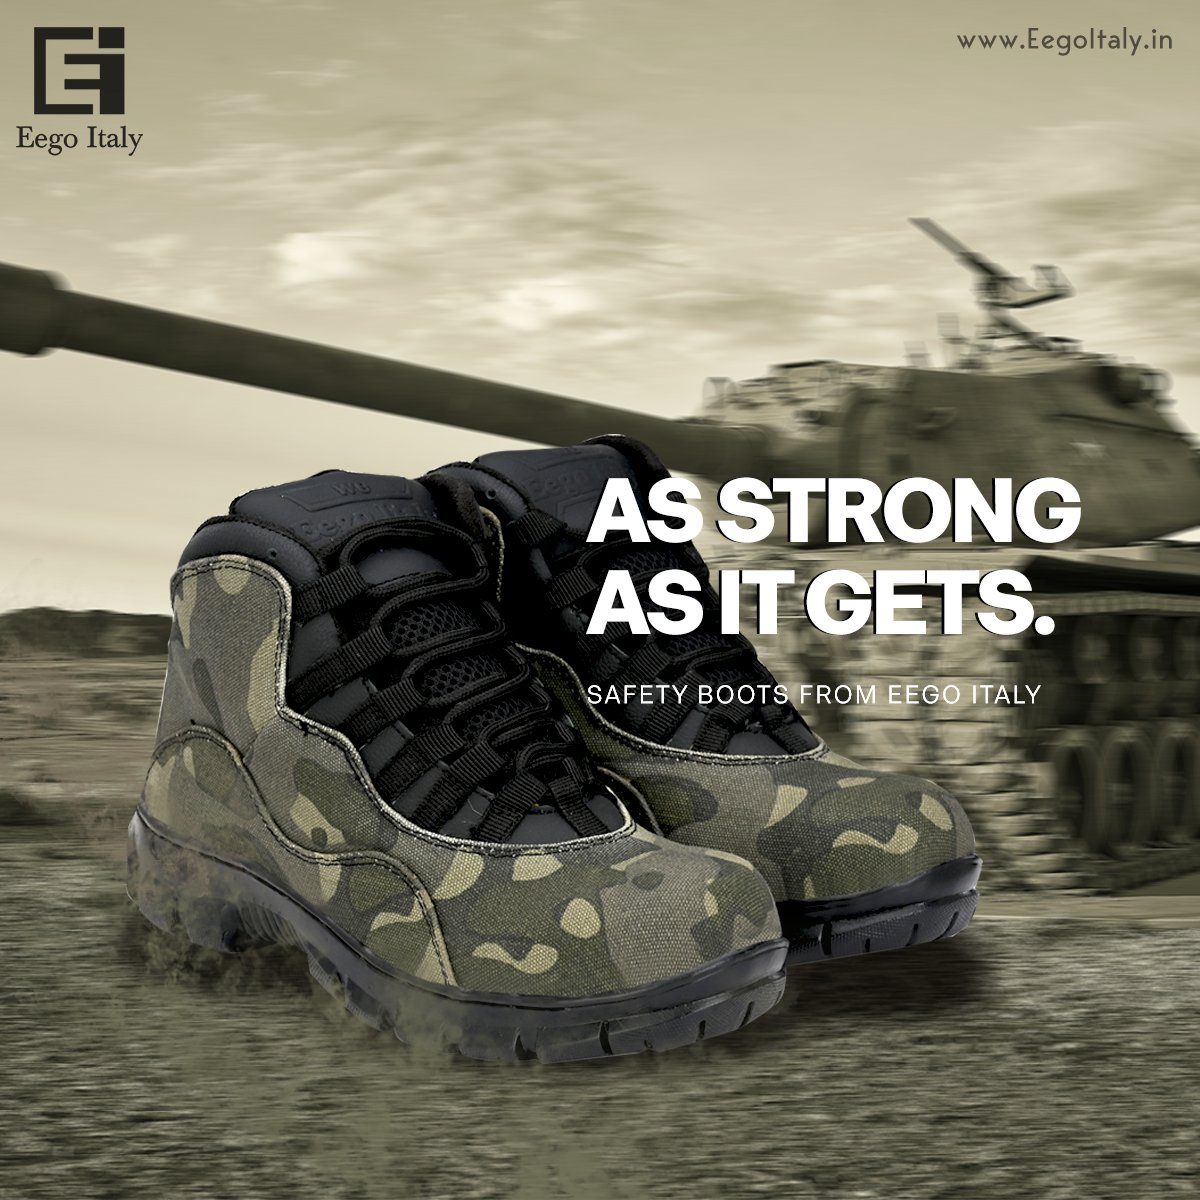 Not to forget incredibly stylish.

Visit eegoitaly.in for our entire collection of Safety Boots.
.
.
.
.
.
#safetyboots #safety #stylishboots #premiumboots #outdoorboots #casualboots #boots #laceupboots #menshoes #shoes #mensfashion #menstyle #menswear #menfashion